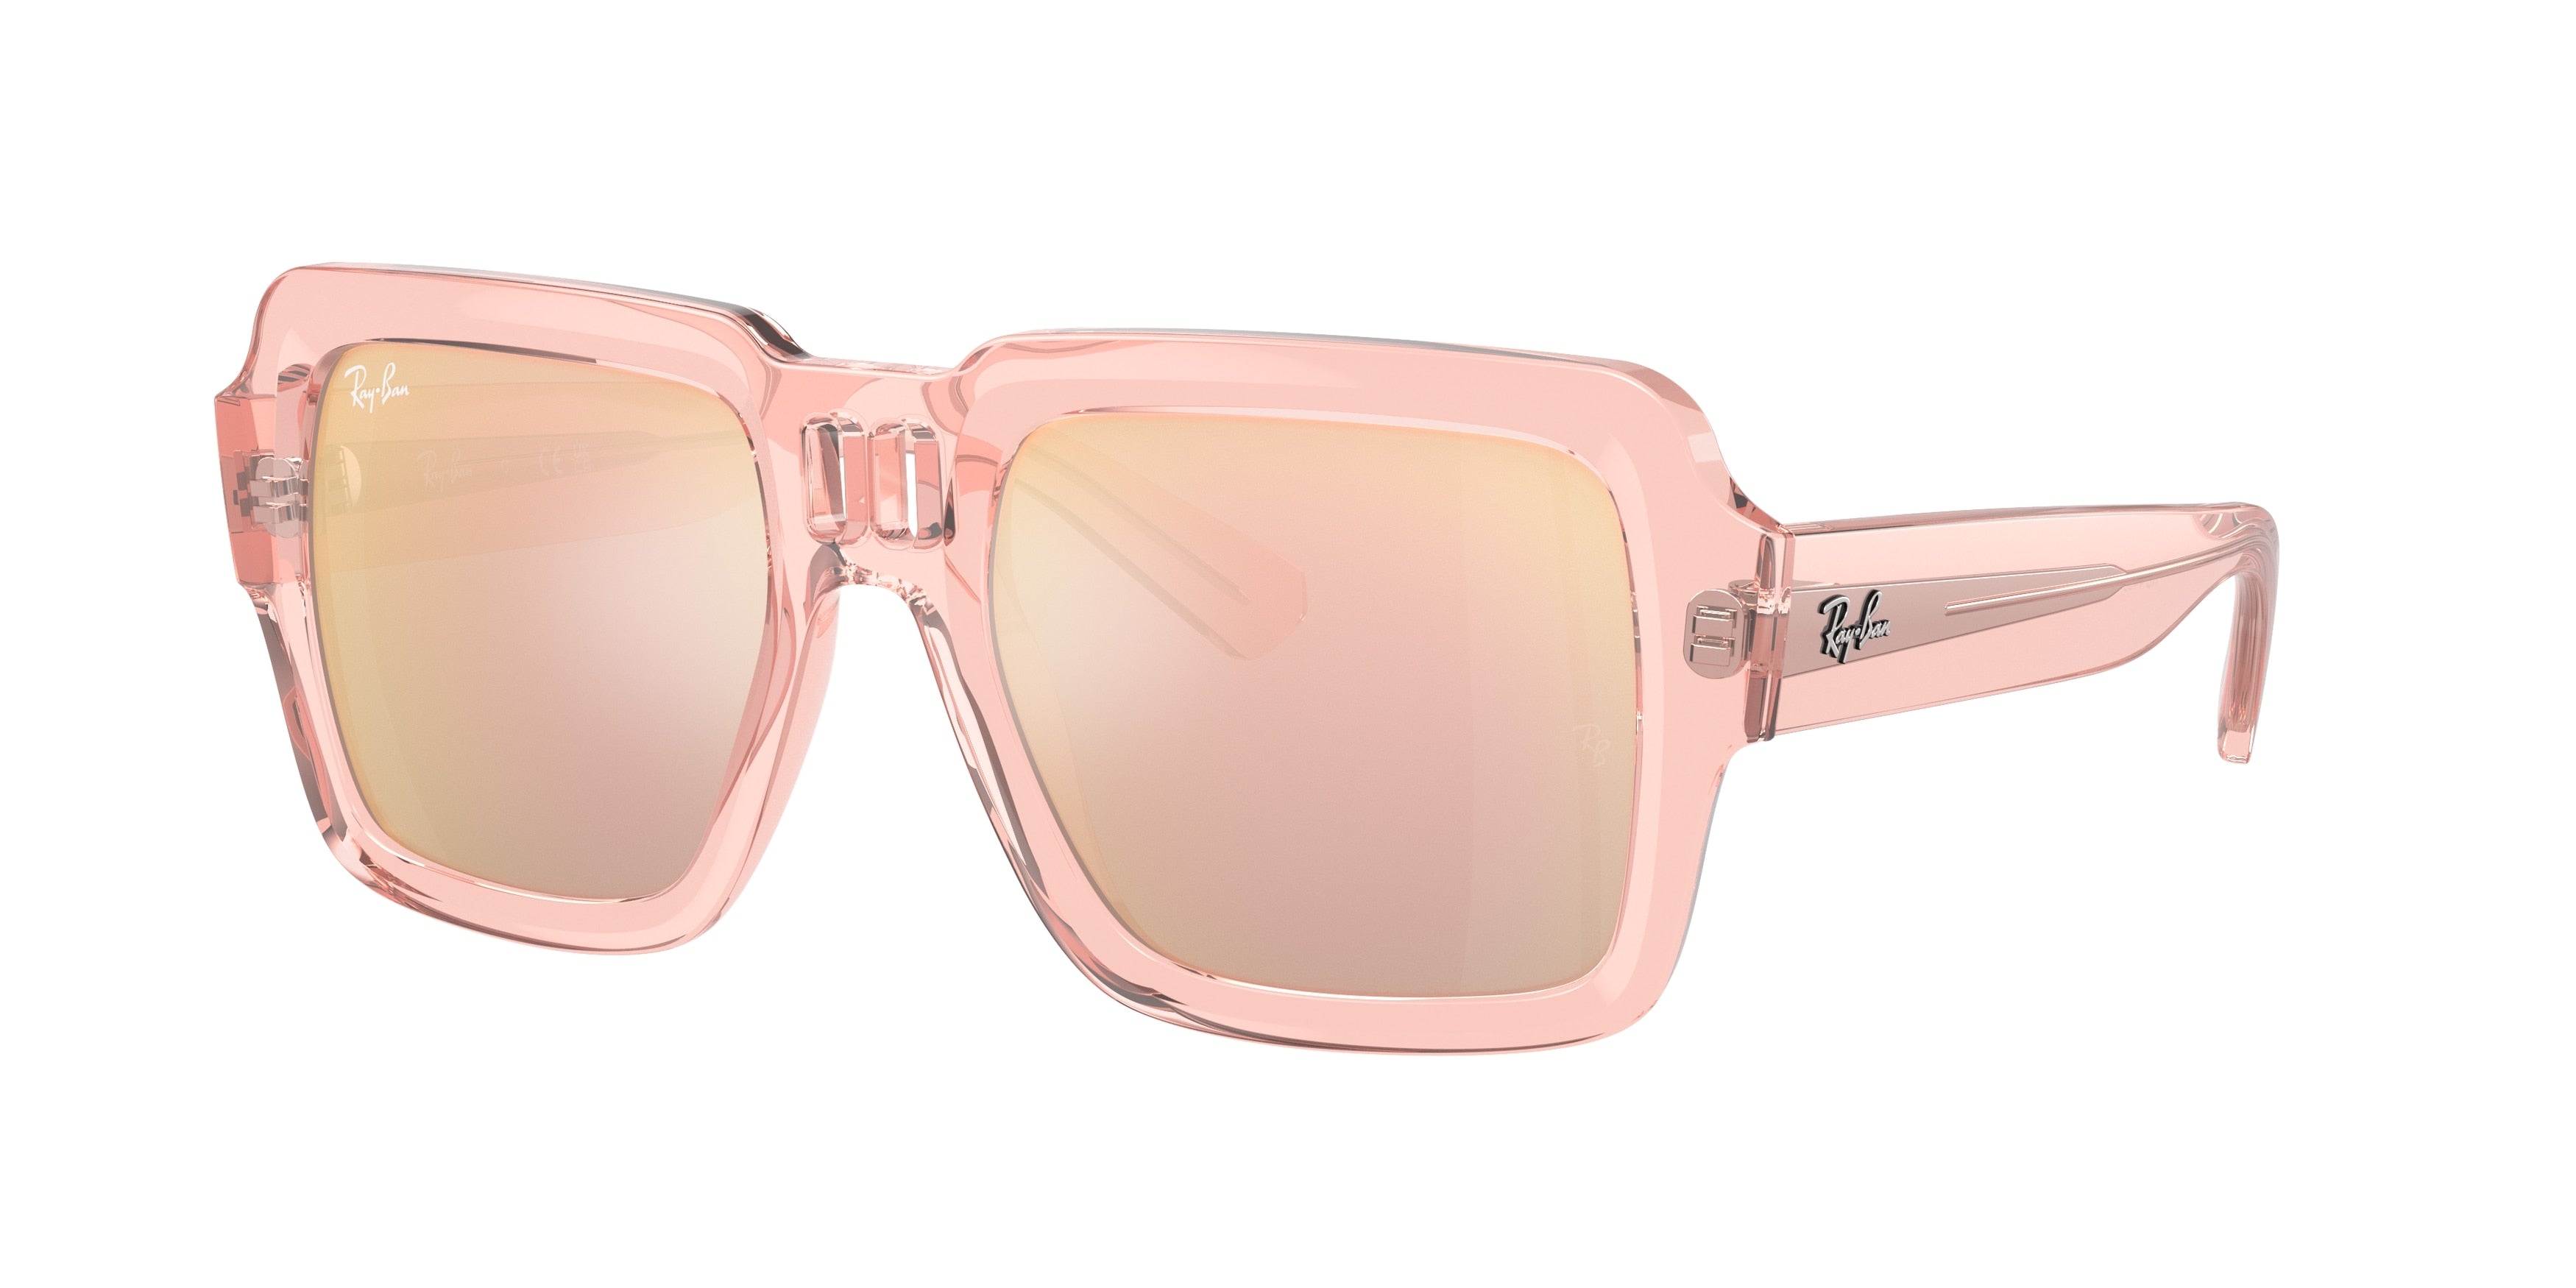 Ray-Ban MAGELLAN RB4408 Square Sunglasses  67286X-Transparent Pink 54-145-19 - Color Map Pink